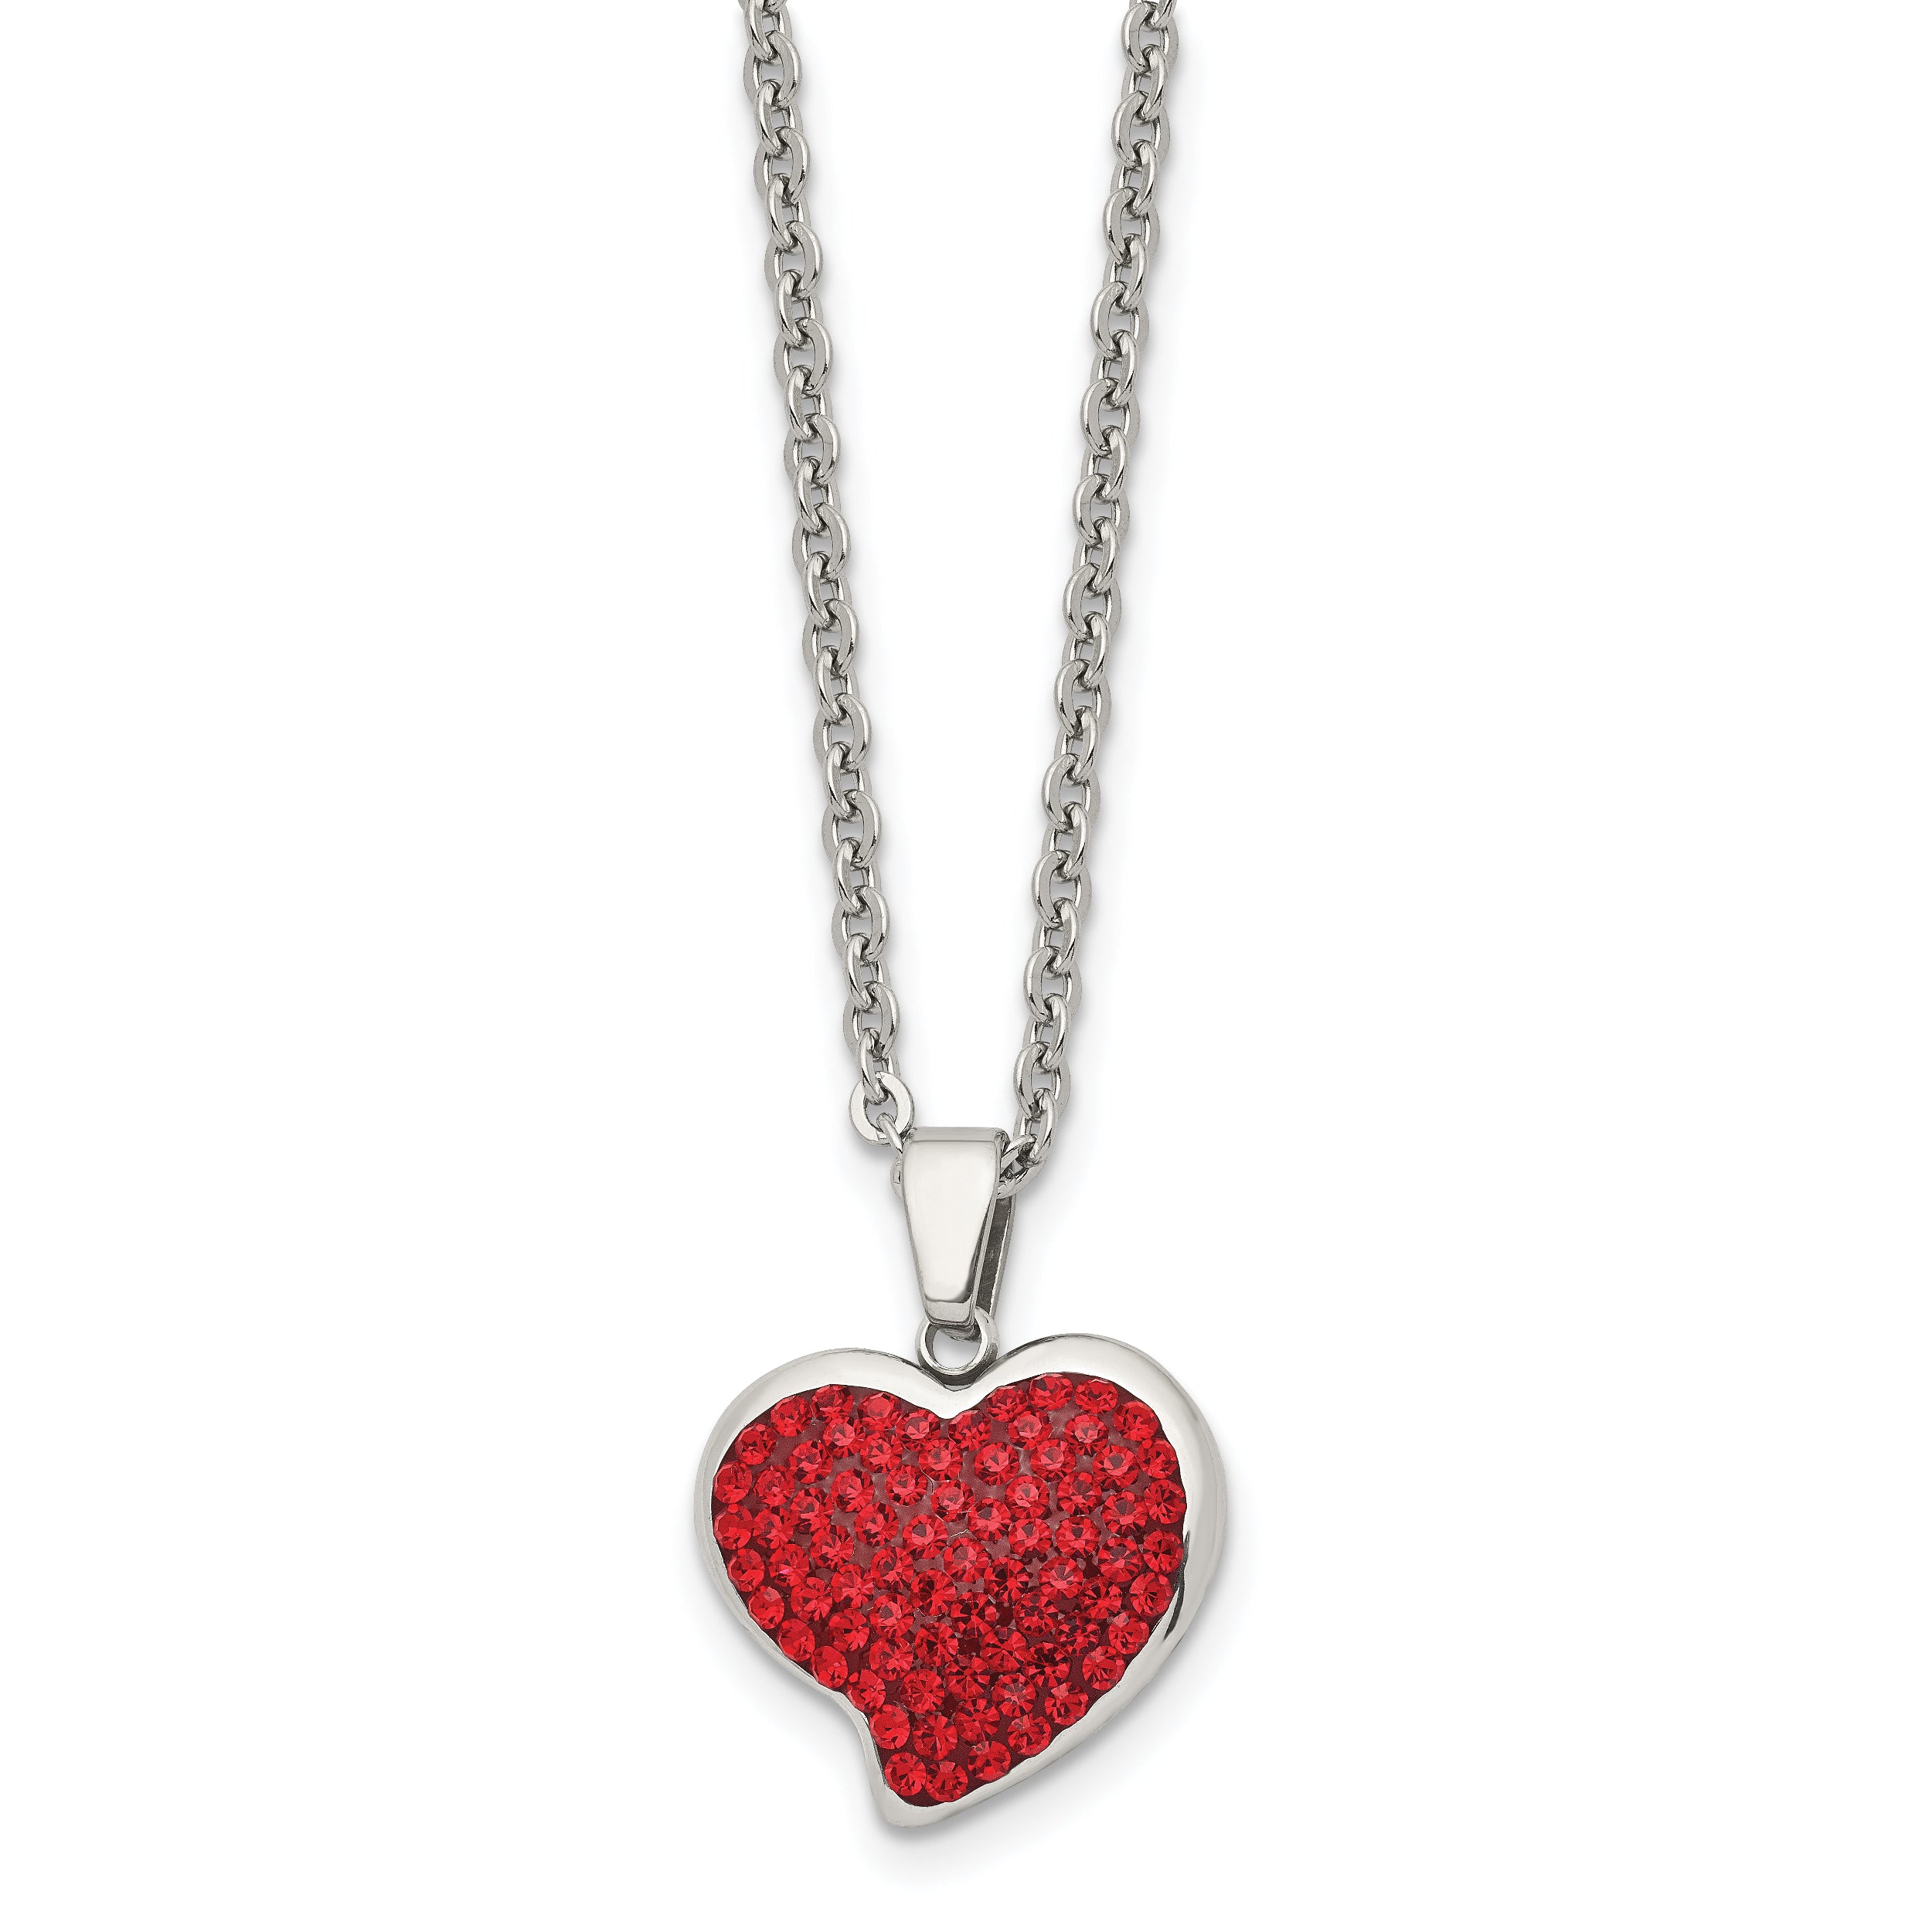 Chisel Stainless Steel Polished with Red Crystal Heart Pendant on a 22 inch Cable Chain Necklace